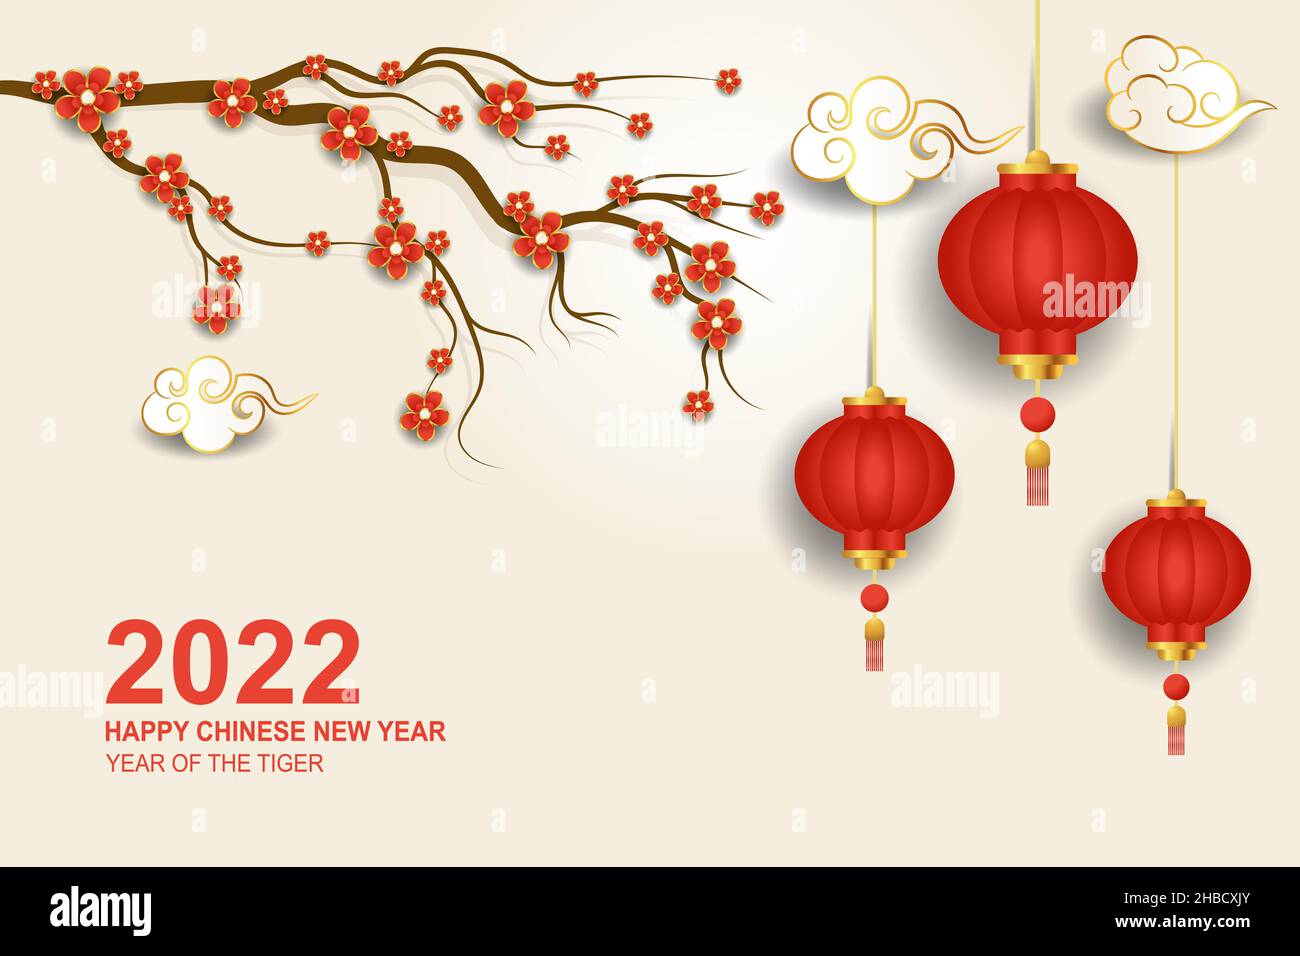 Chinese new year 2022 background with Sakura flower and lantern ornament Stock Vector